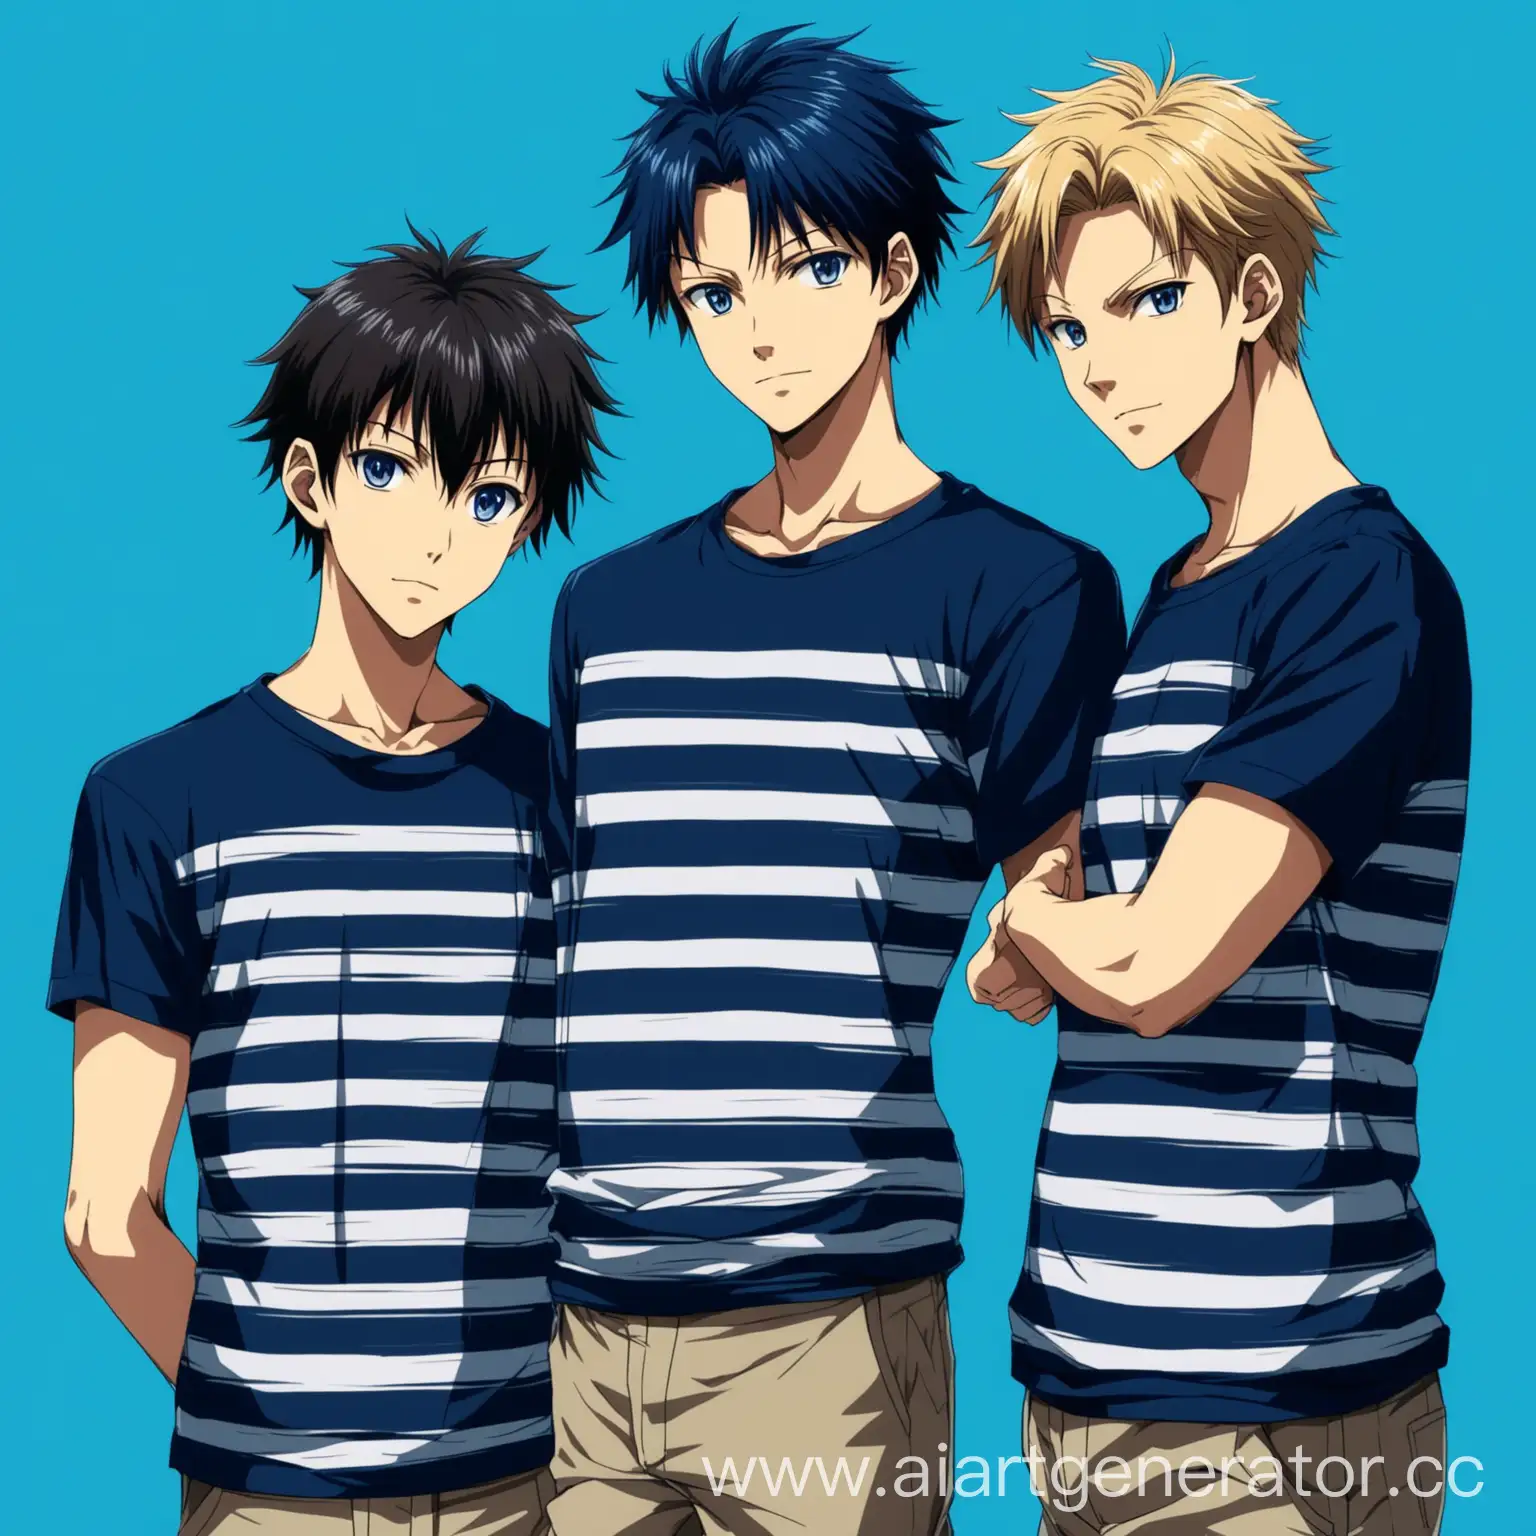 Anime-Guys-in-Striped-Navy-TShirts-on-Blue-Background